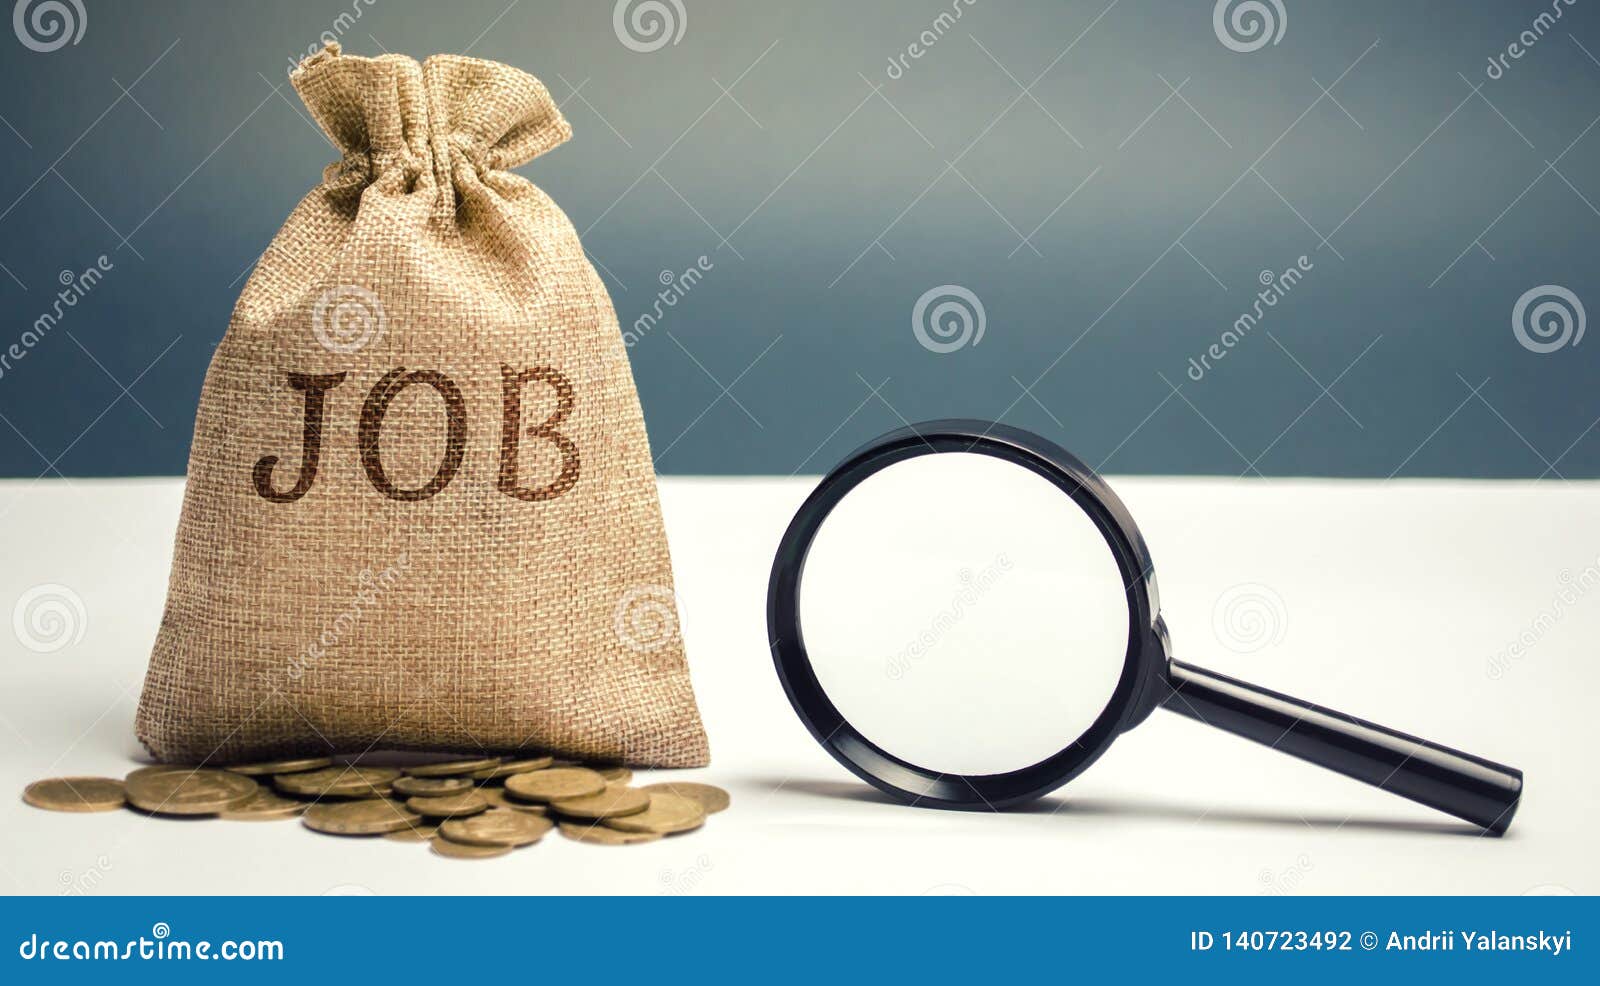 money bag with the word job and a magnifying glass. work search concept. available job vacancies. high unemployment. applicants